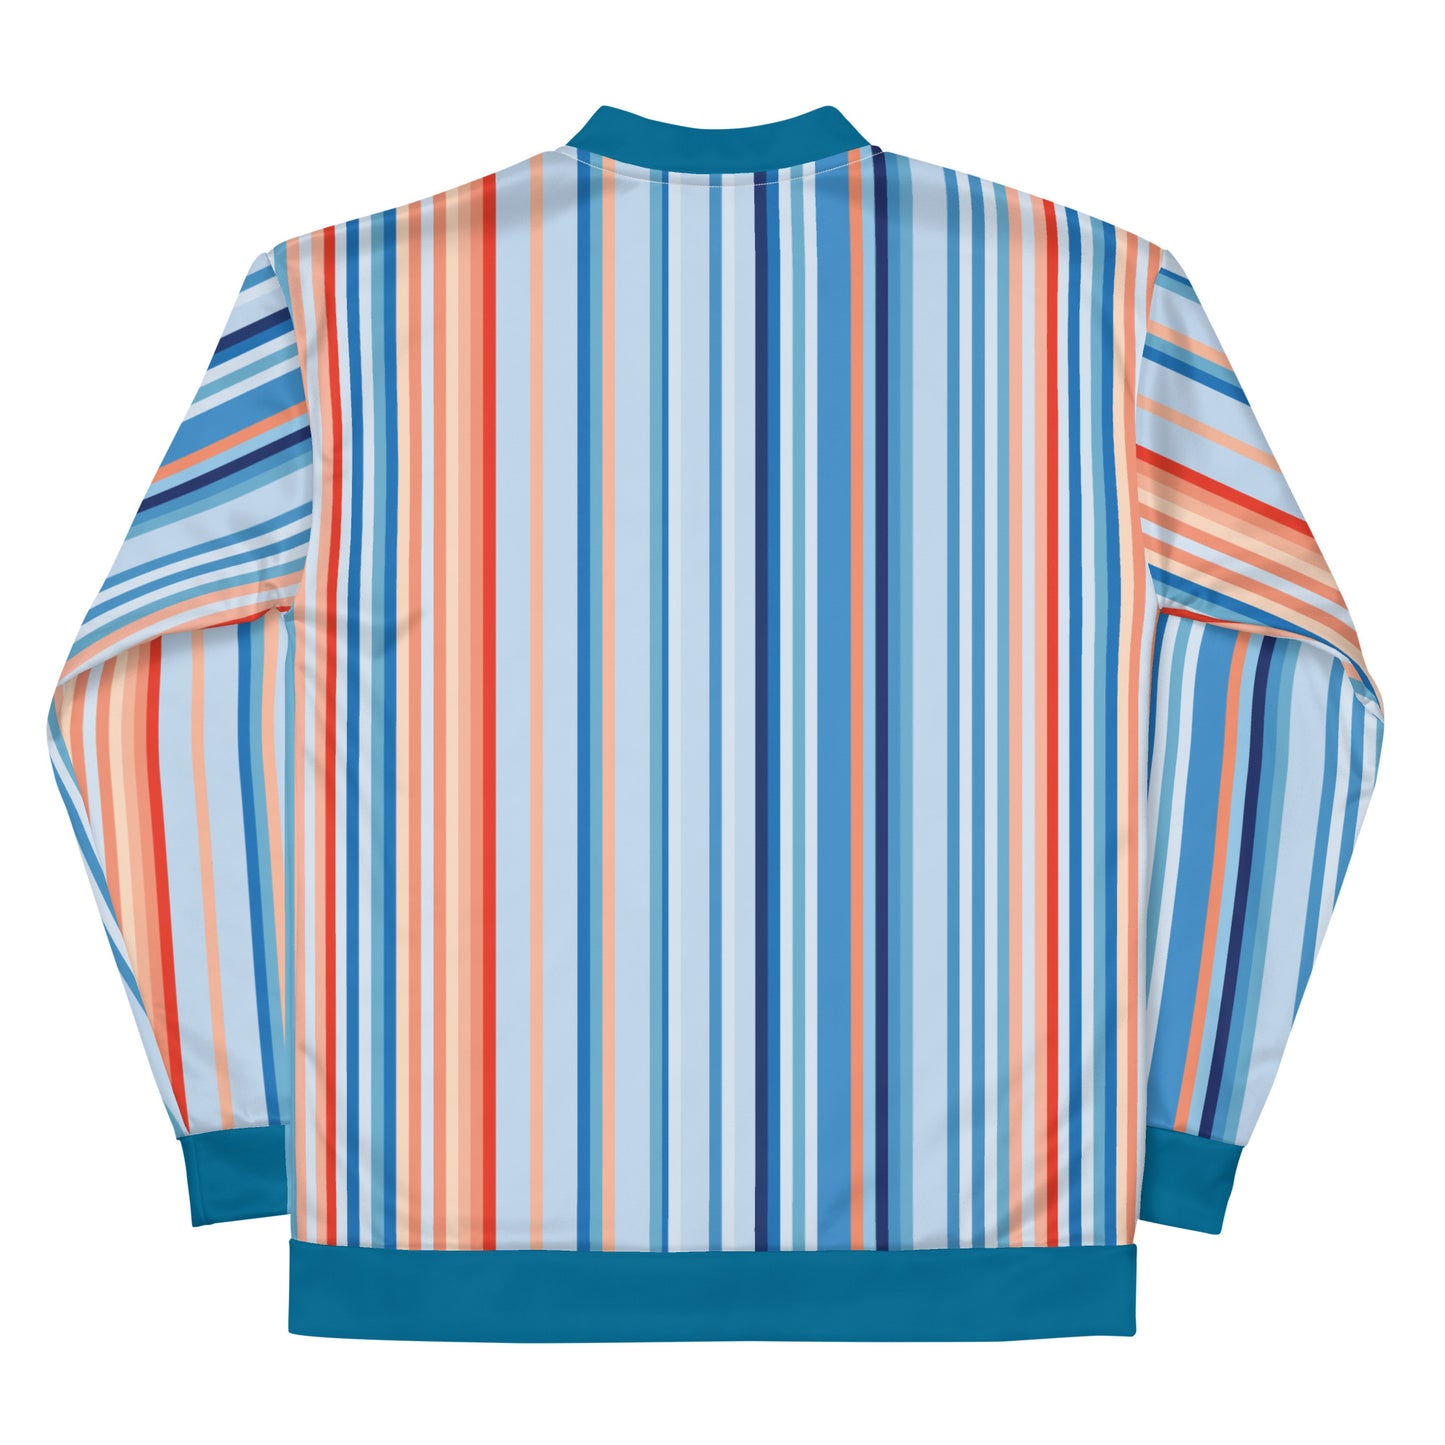 Climate Change Global Warming Stripes - Sustainably Made Bomber Jacket Vertical